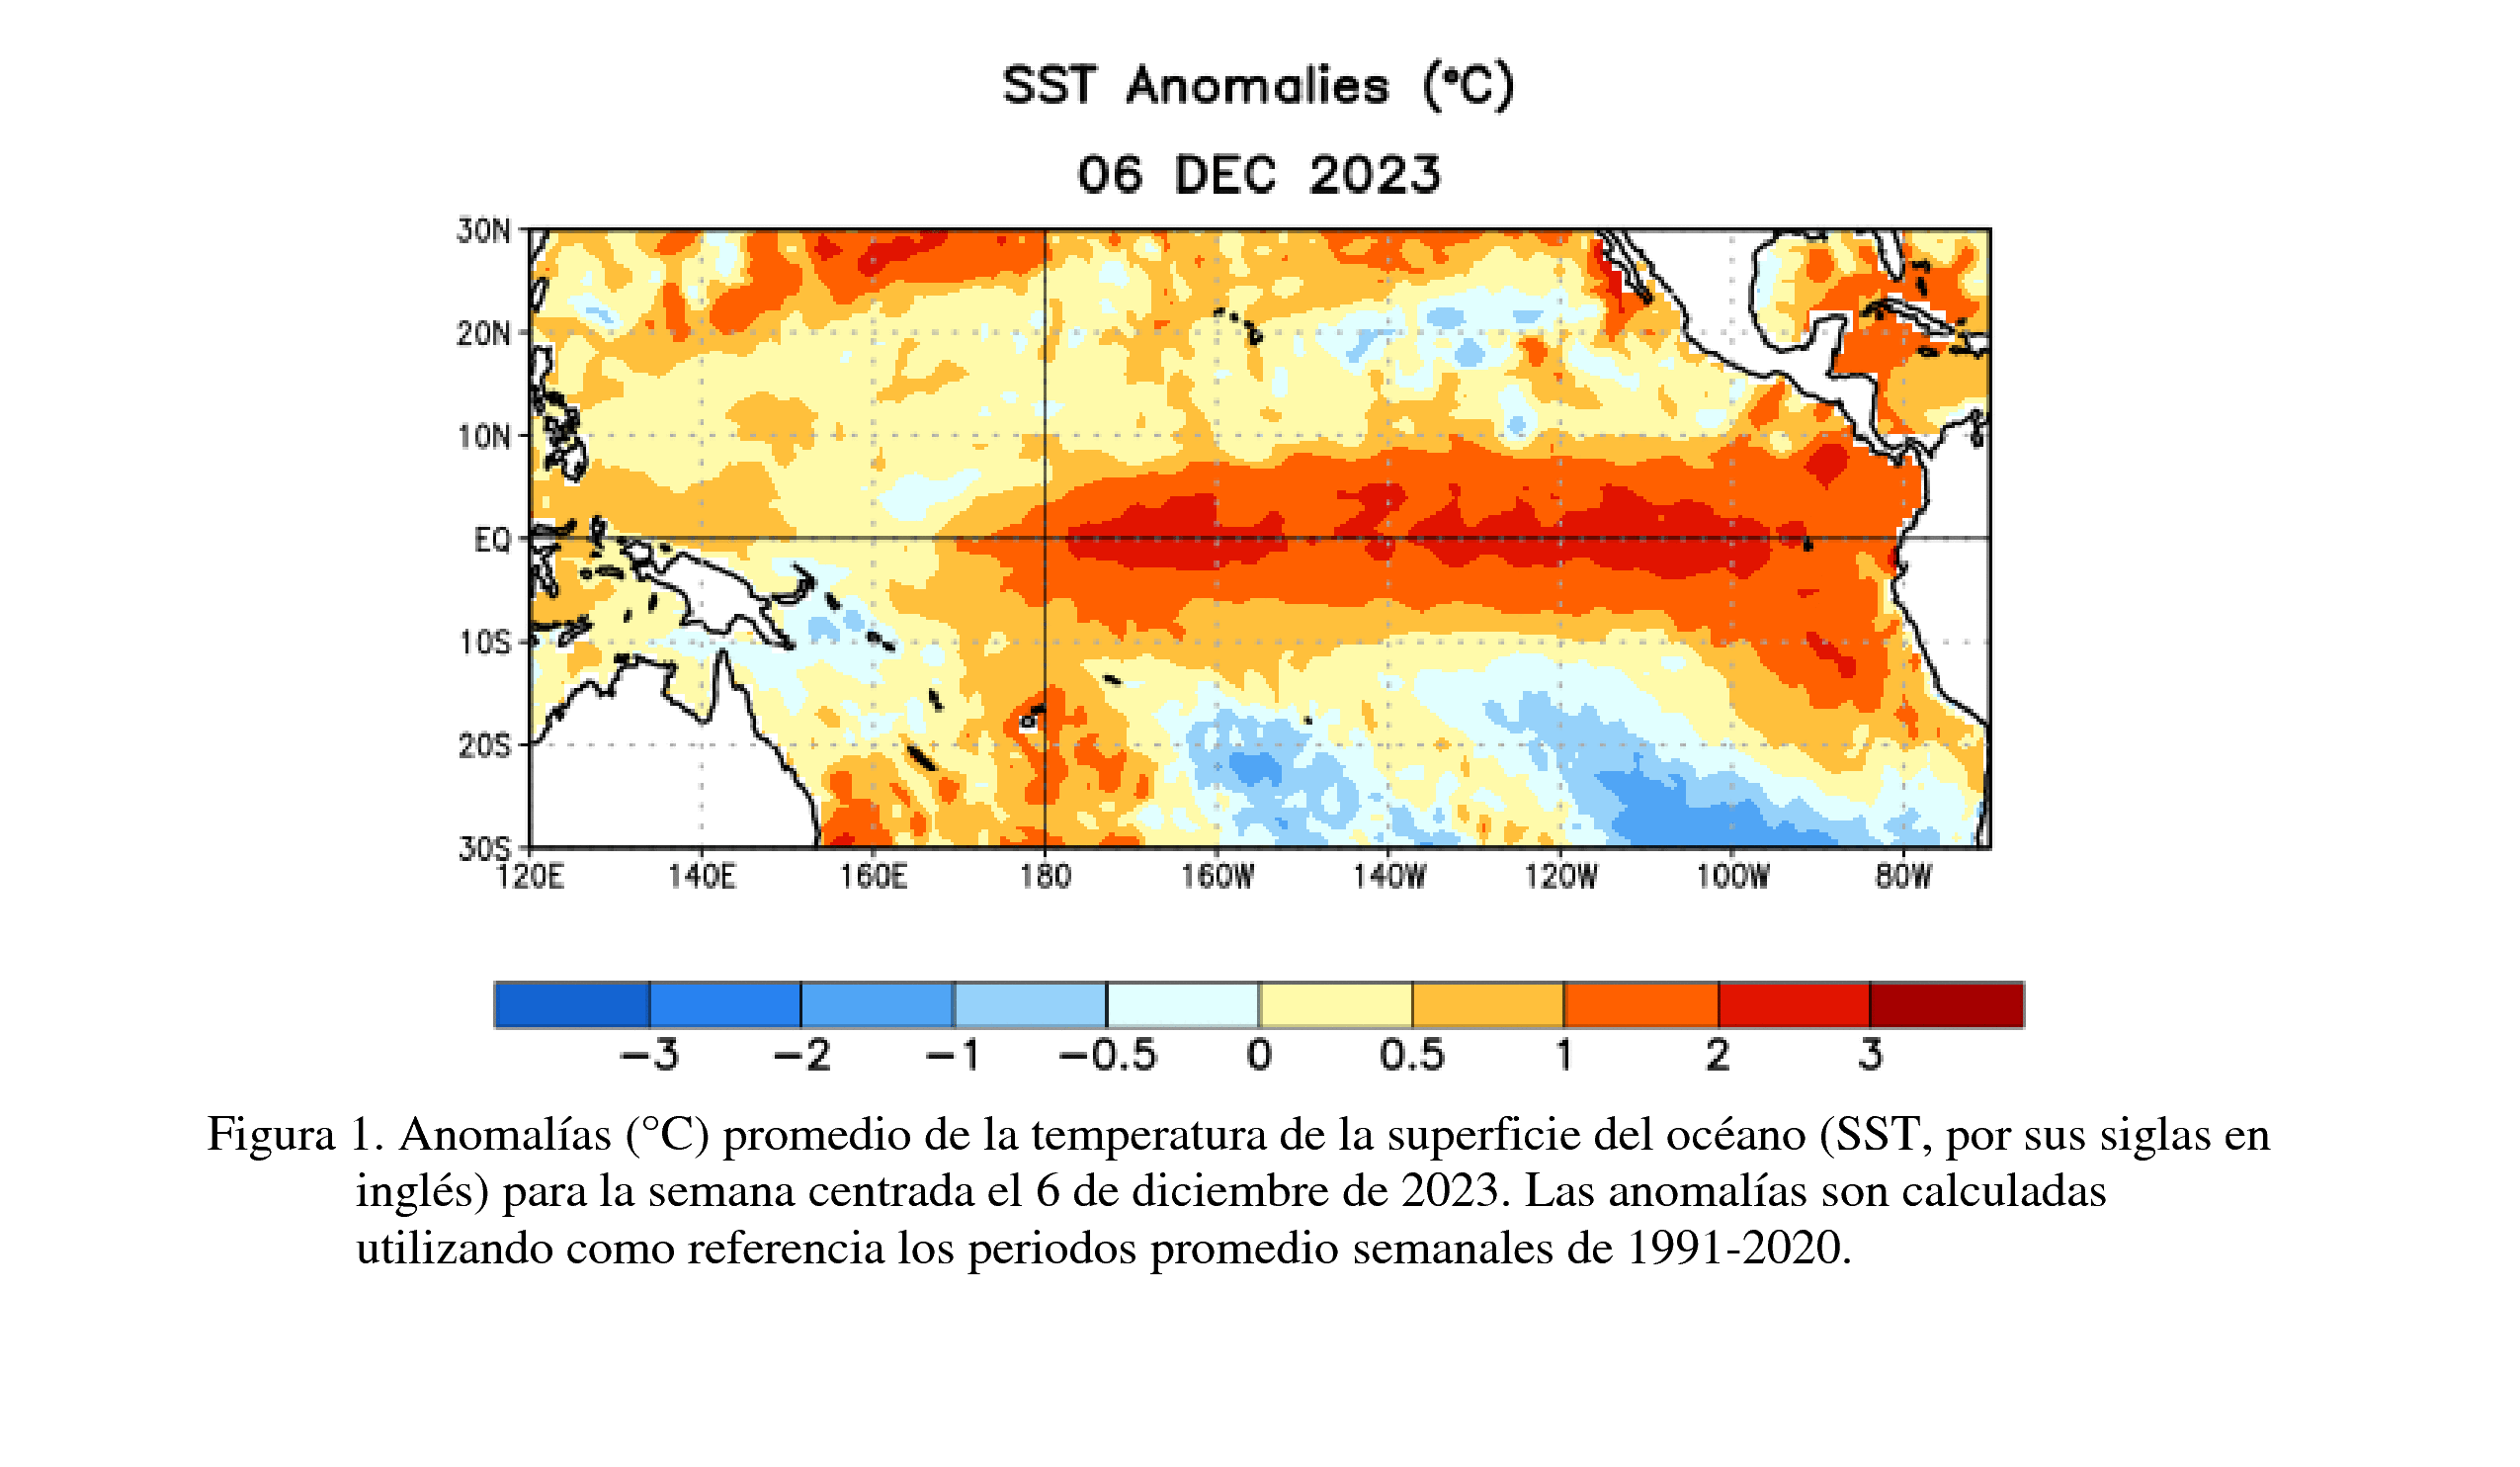 The Looming La Niña: Unraveling the Global Impacts of the Shifting ENSO Cycle